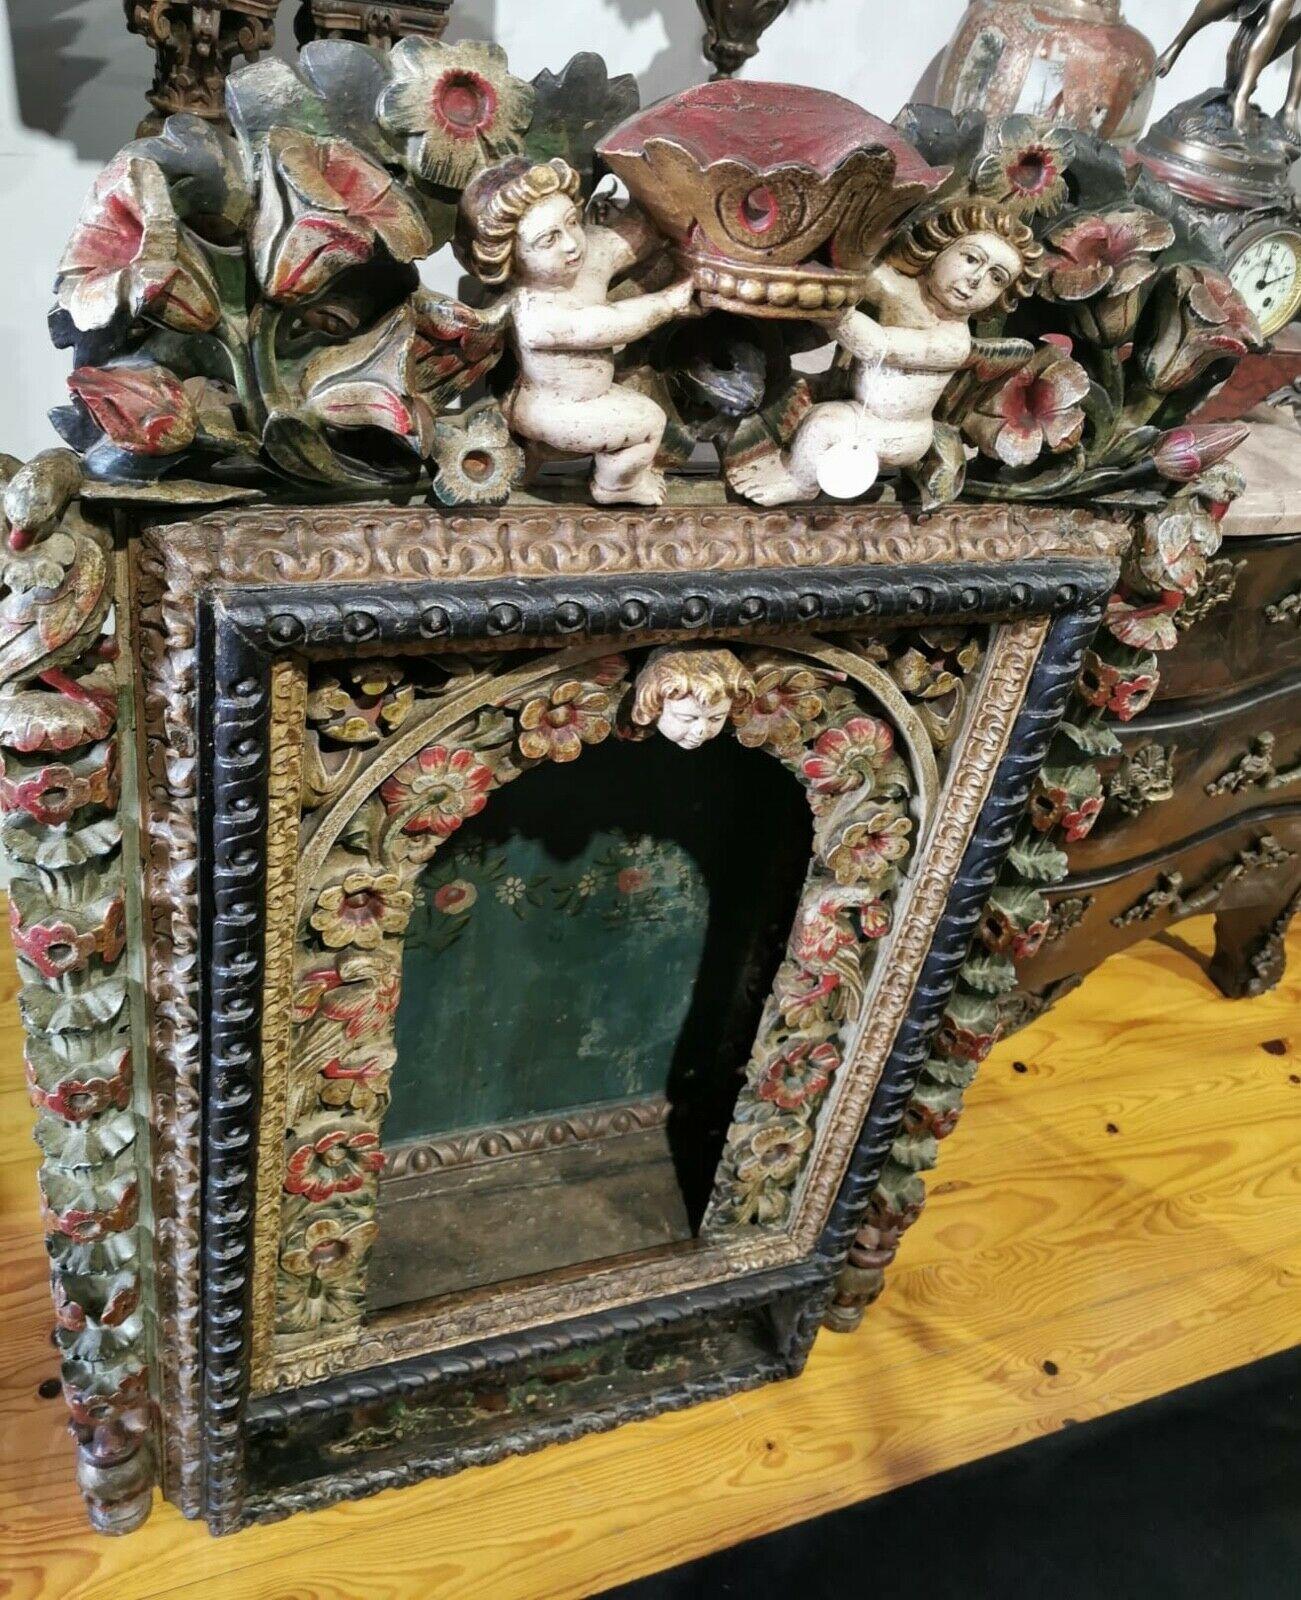 Title: Portuguese Oratory cabinet
Date/Period: 17th century
Dimension: 117cm x 78cm x 30cm, carved wood
Materials: Carved wood, gilded
Additional information: Oratory cabinet the 17th century, carved wood, gilded with sculptures in the form of